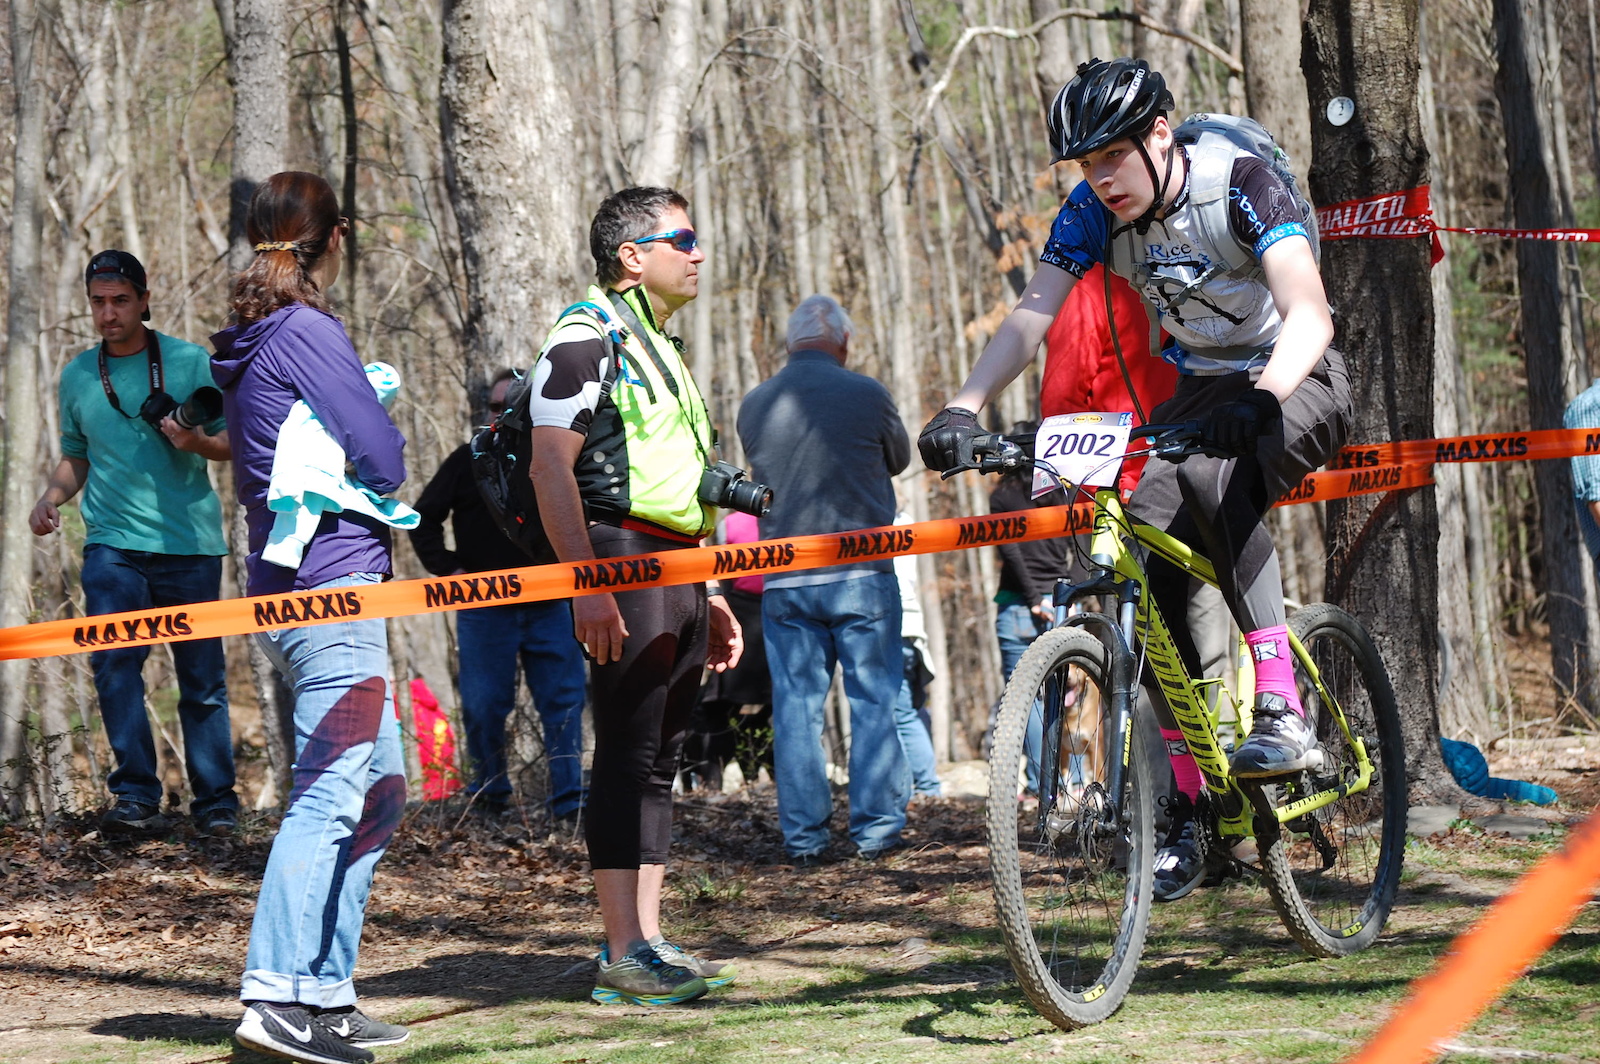 R-Cubed NICA Composite team racing at New York NICA first race in 2016 at Lippman Park